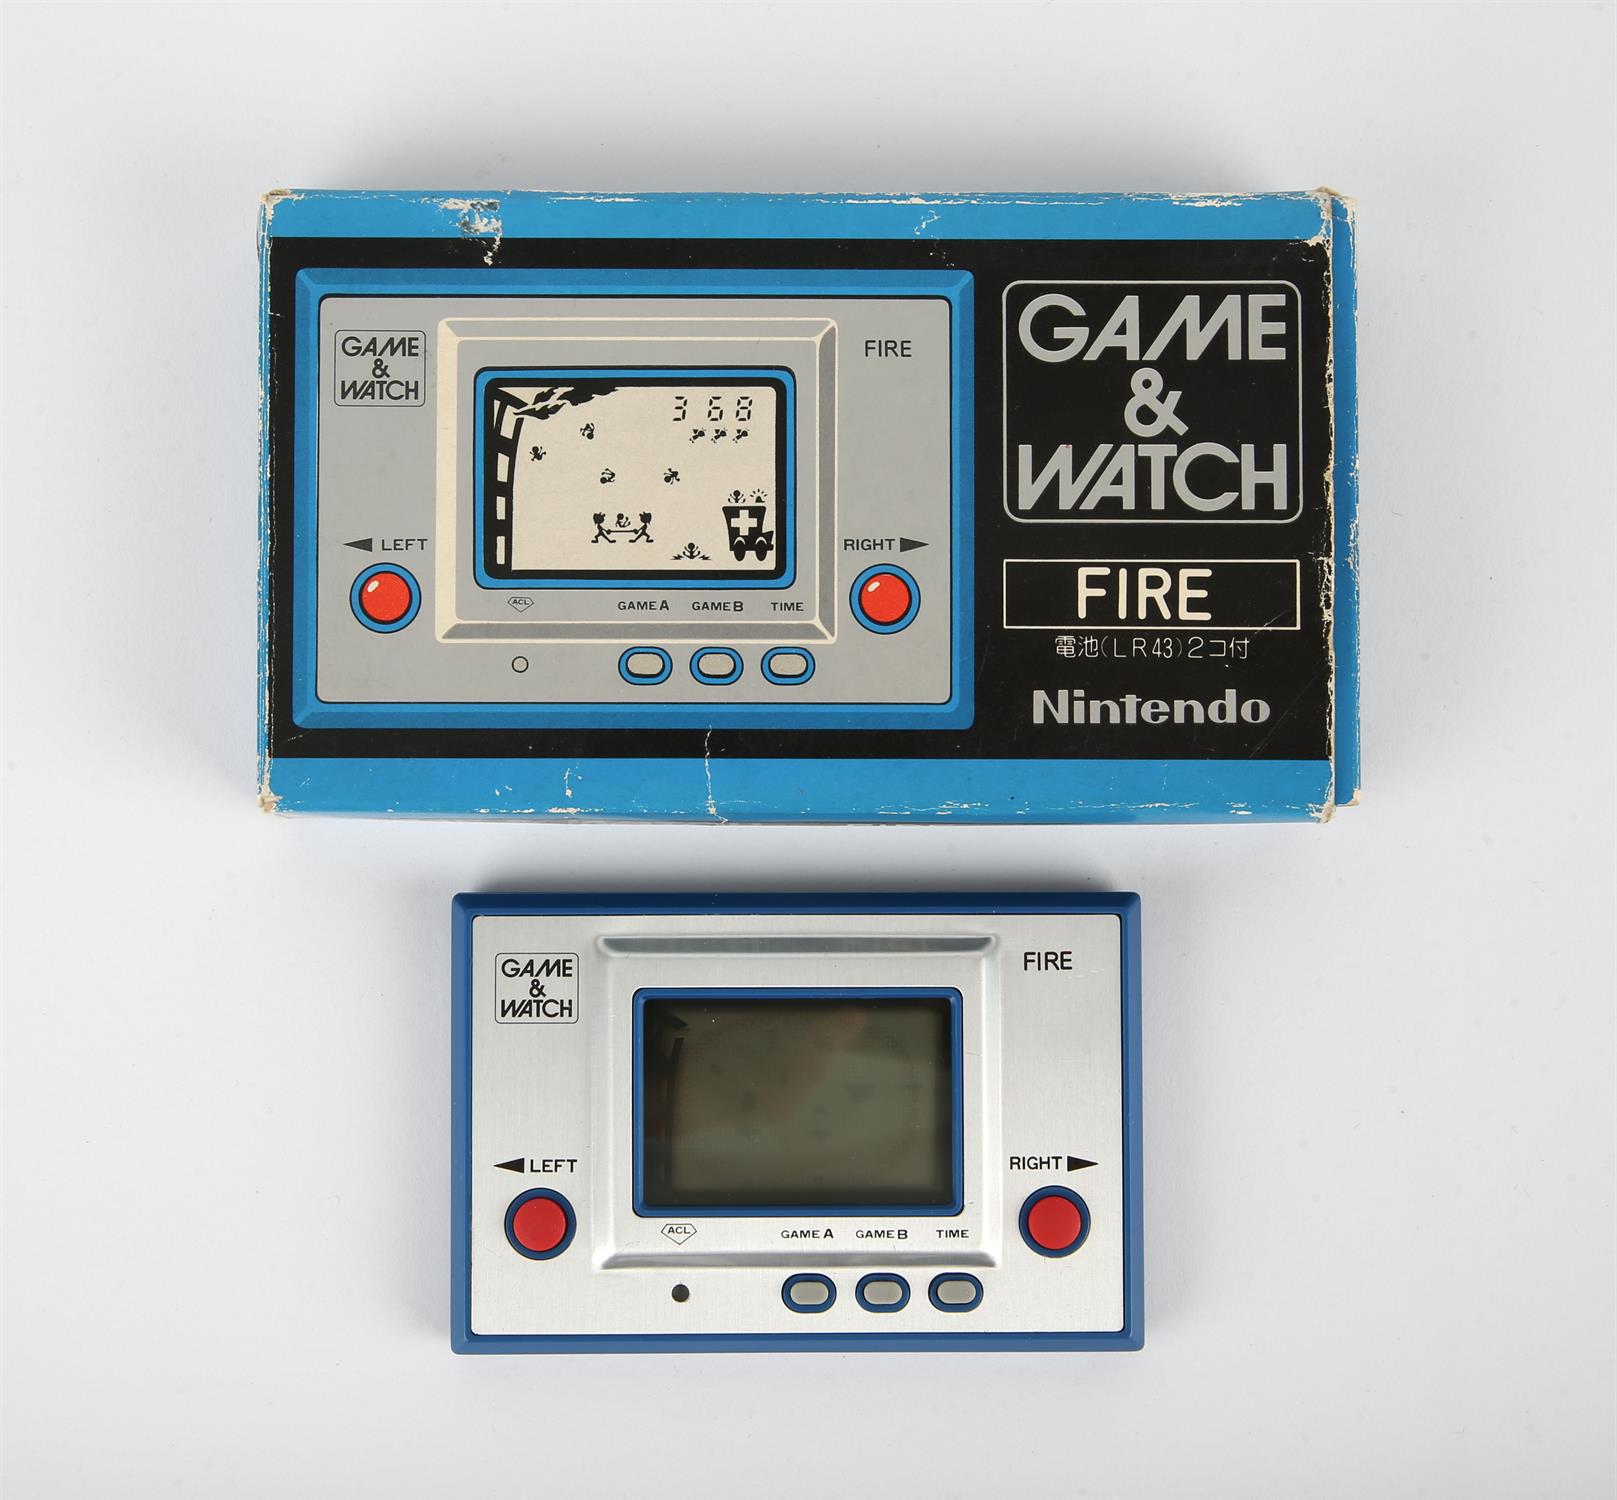 Nintendo Game & Watch Fire [RC-04] handheld console from 1980 (complete and boxed) Item is tested